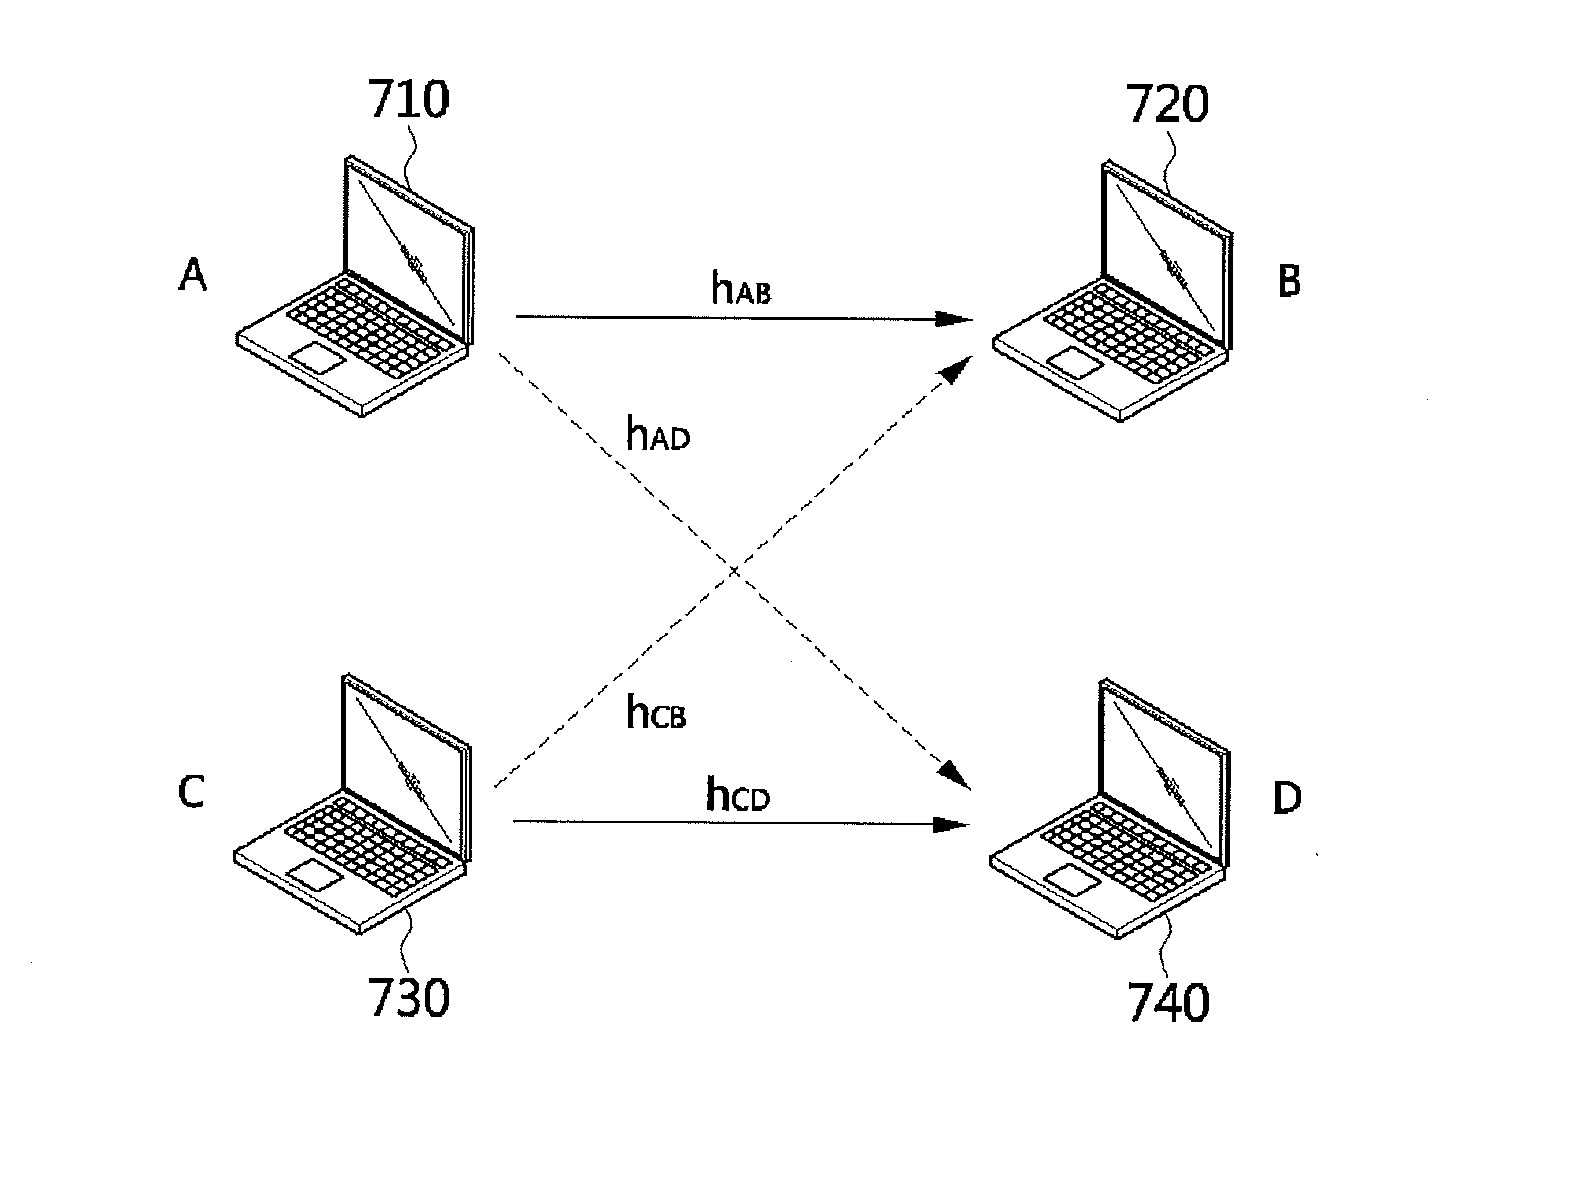 Methods of device to device communication